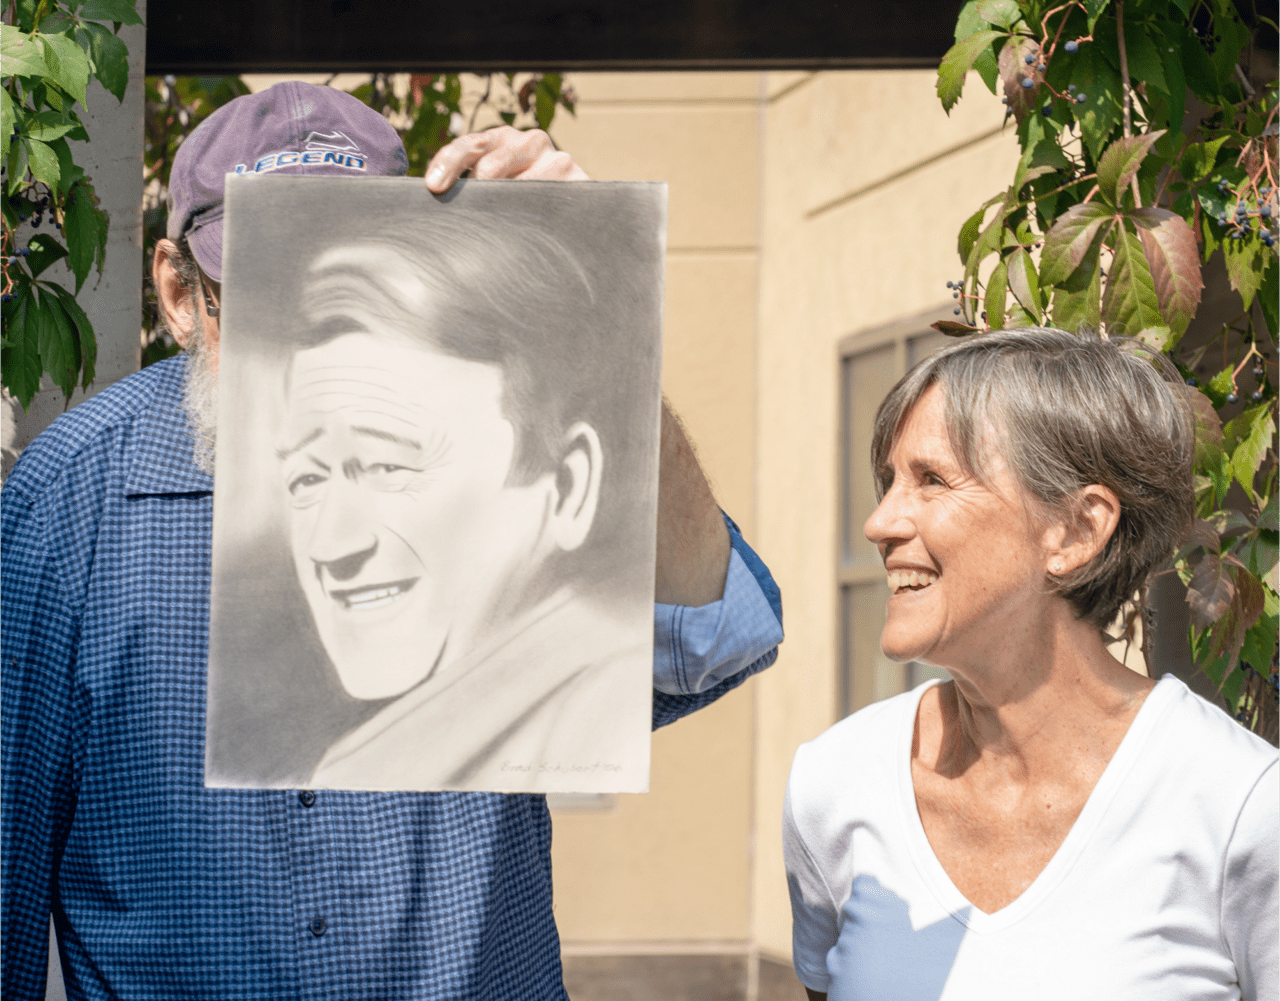 An image of two people, one man holding up their drawing of a portrait, and a shorter woman looking at it.